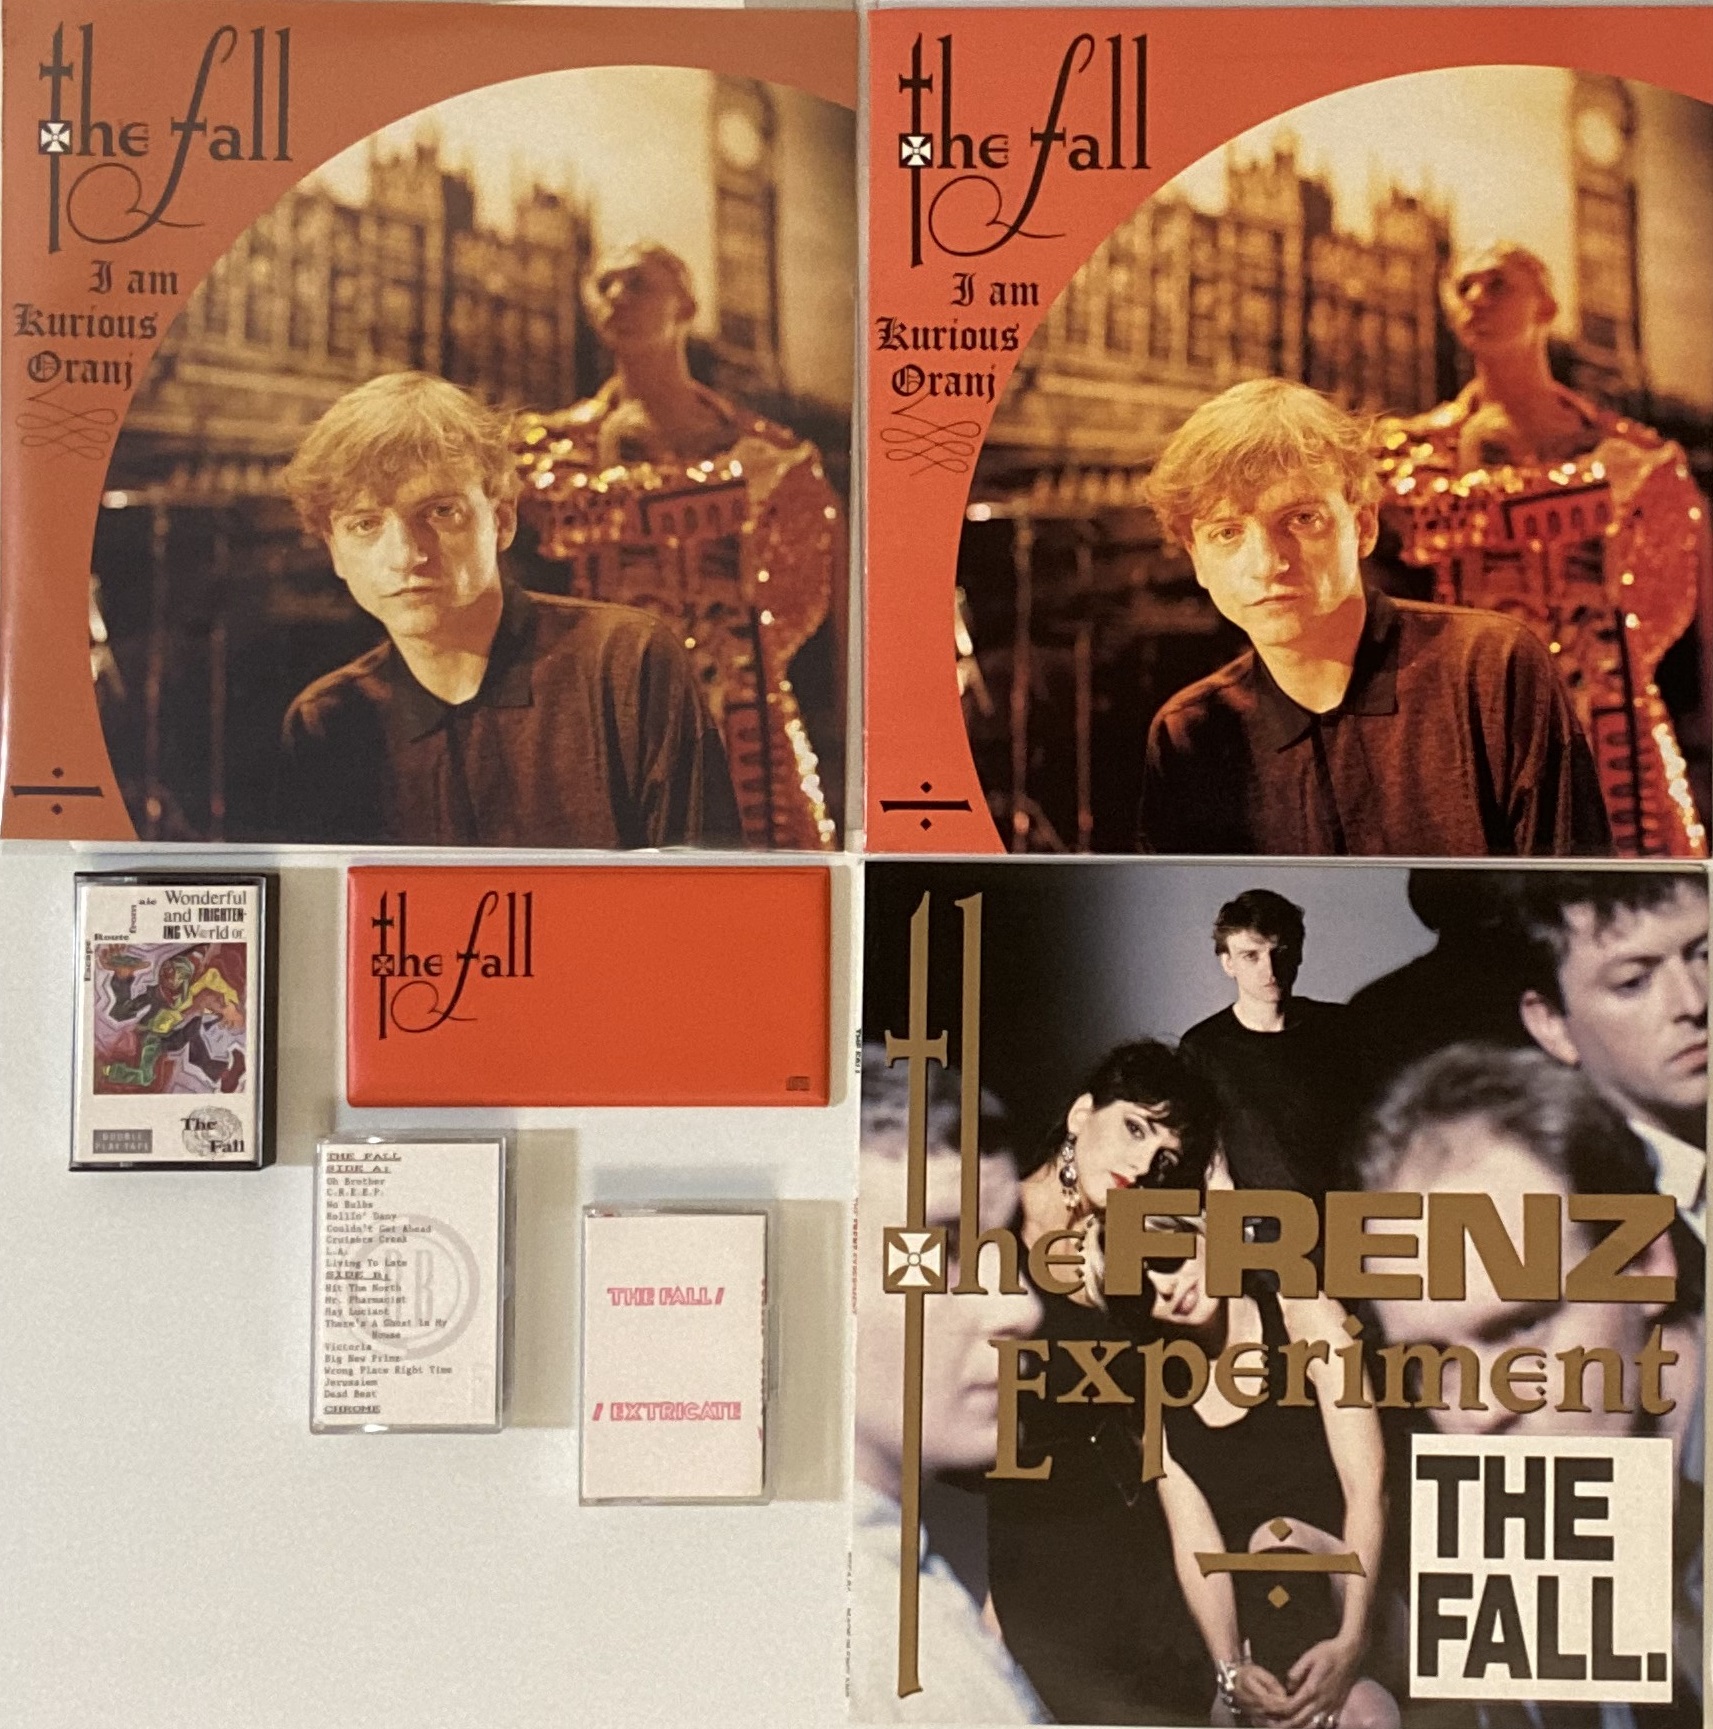 THE FALL - LP (TEST PRESSINGS) WITH CASSETTES AND CDs (MAINLY DEMO/PROMOS).